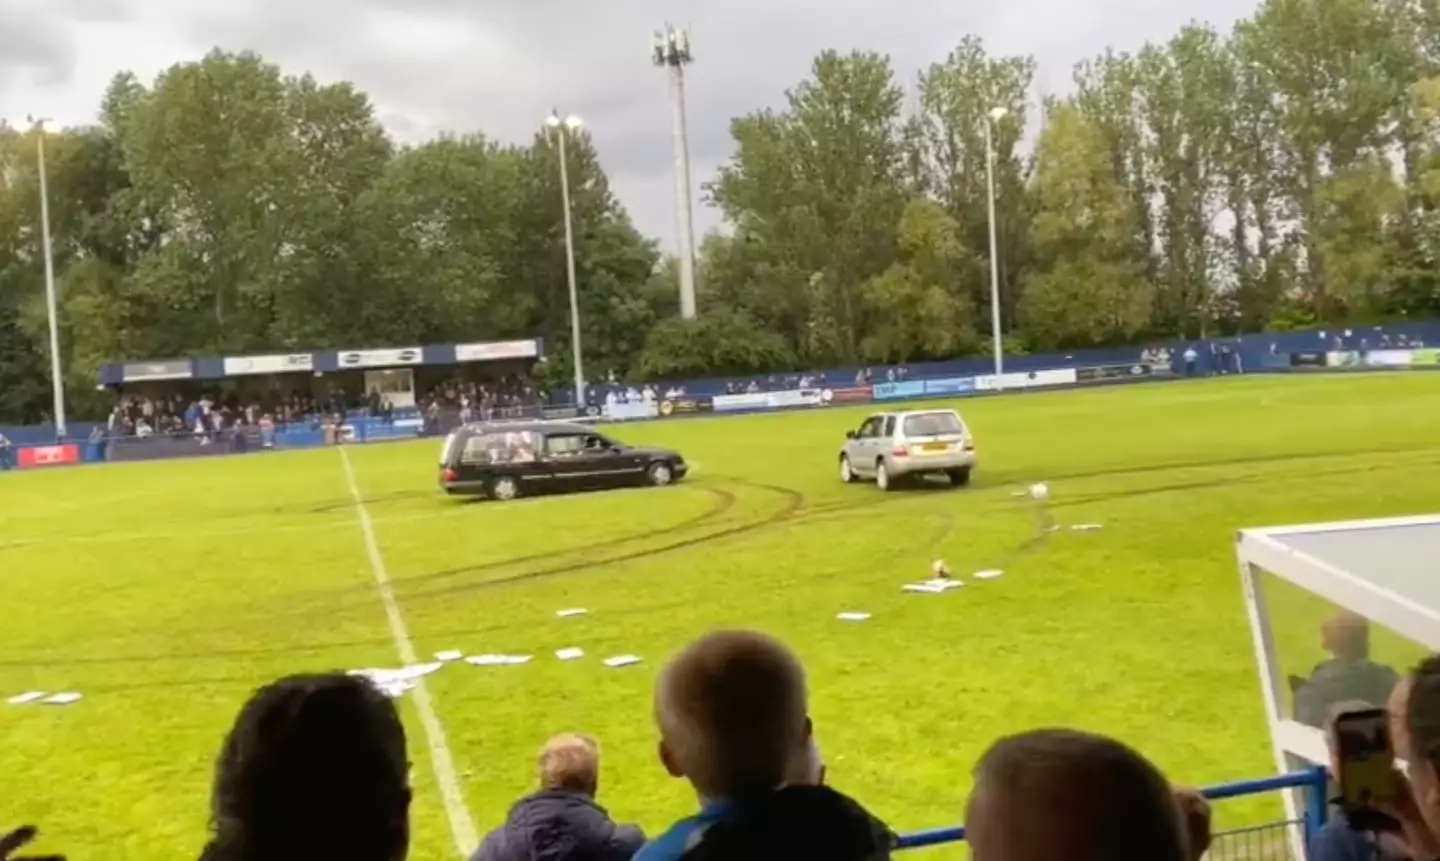 A hearse drove onto the pitch.